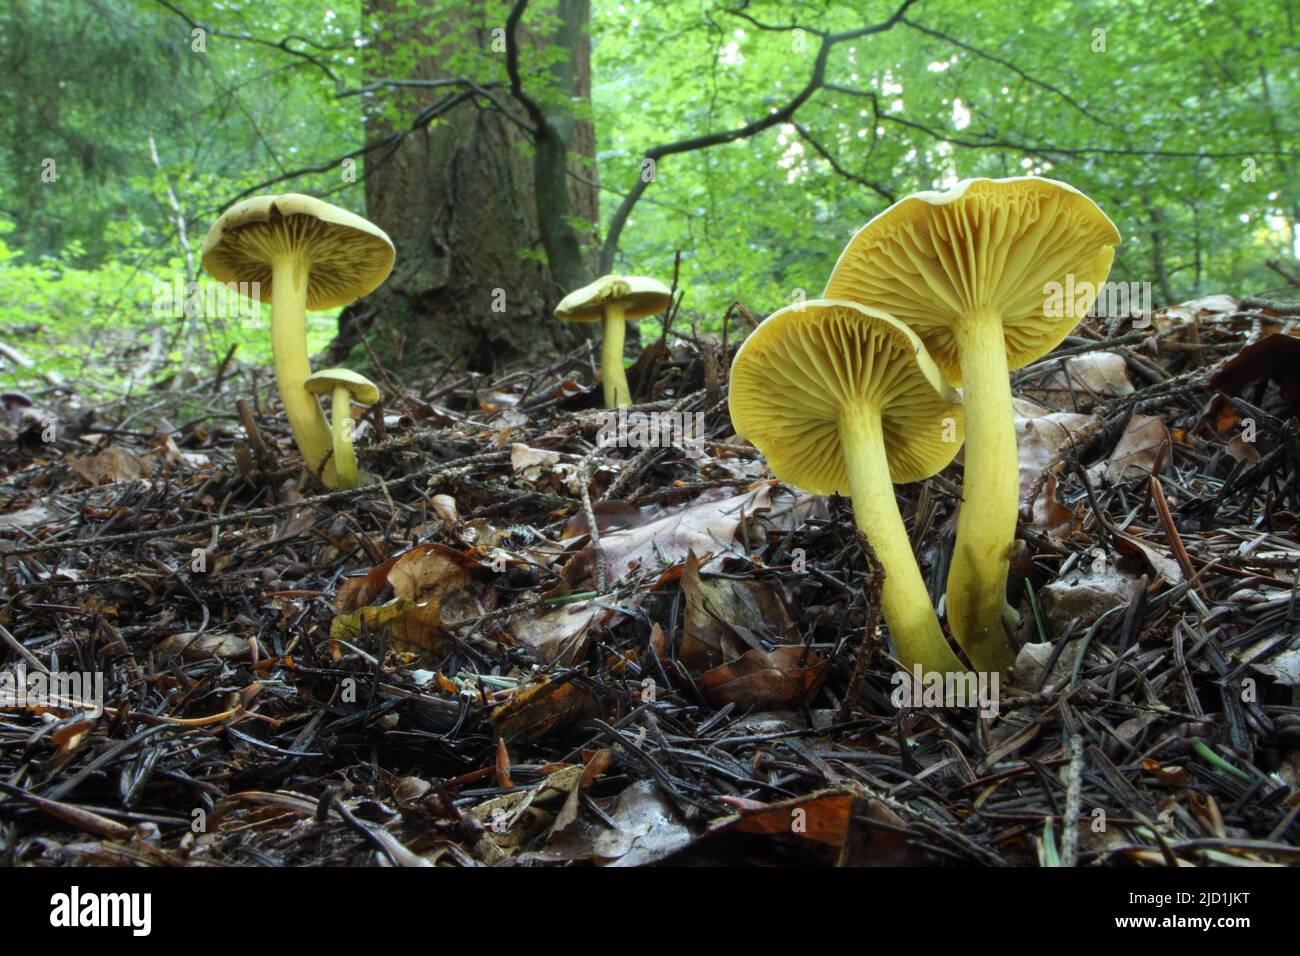 A group of Sulphur Knightlings (Tricholoma sulphureum) in the Taunus, Hesse, Germany Stock Photo